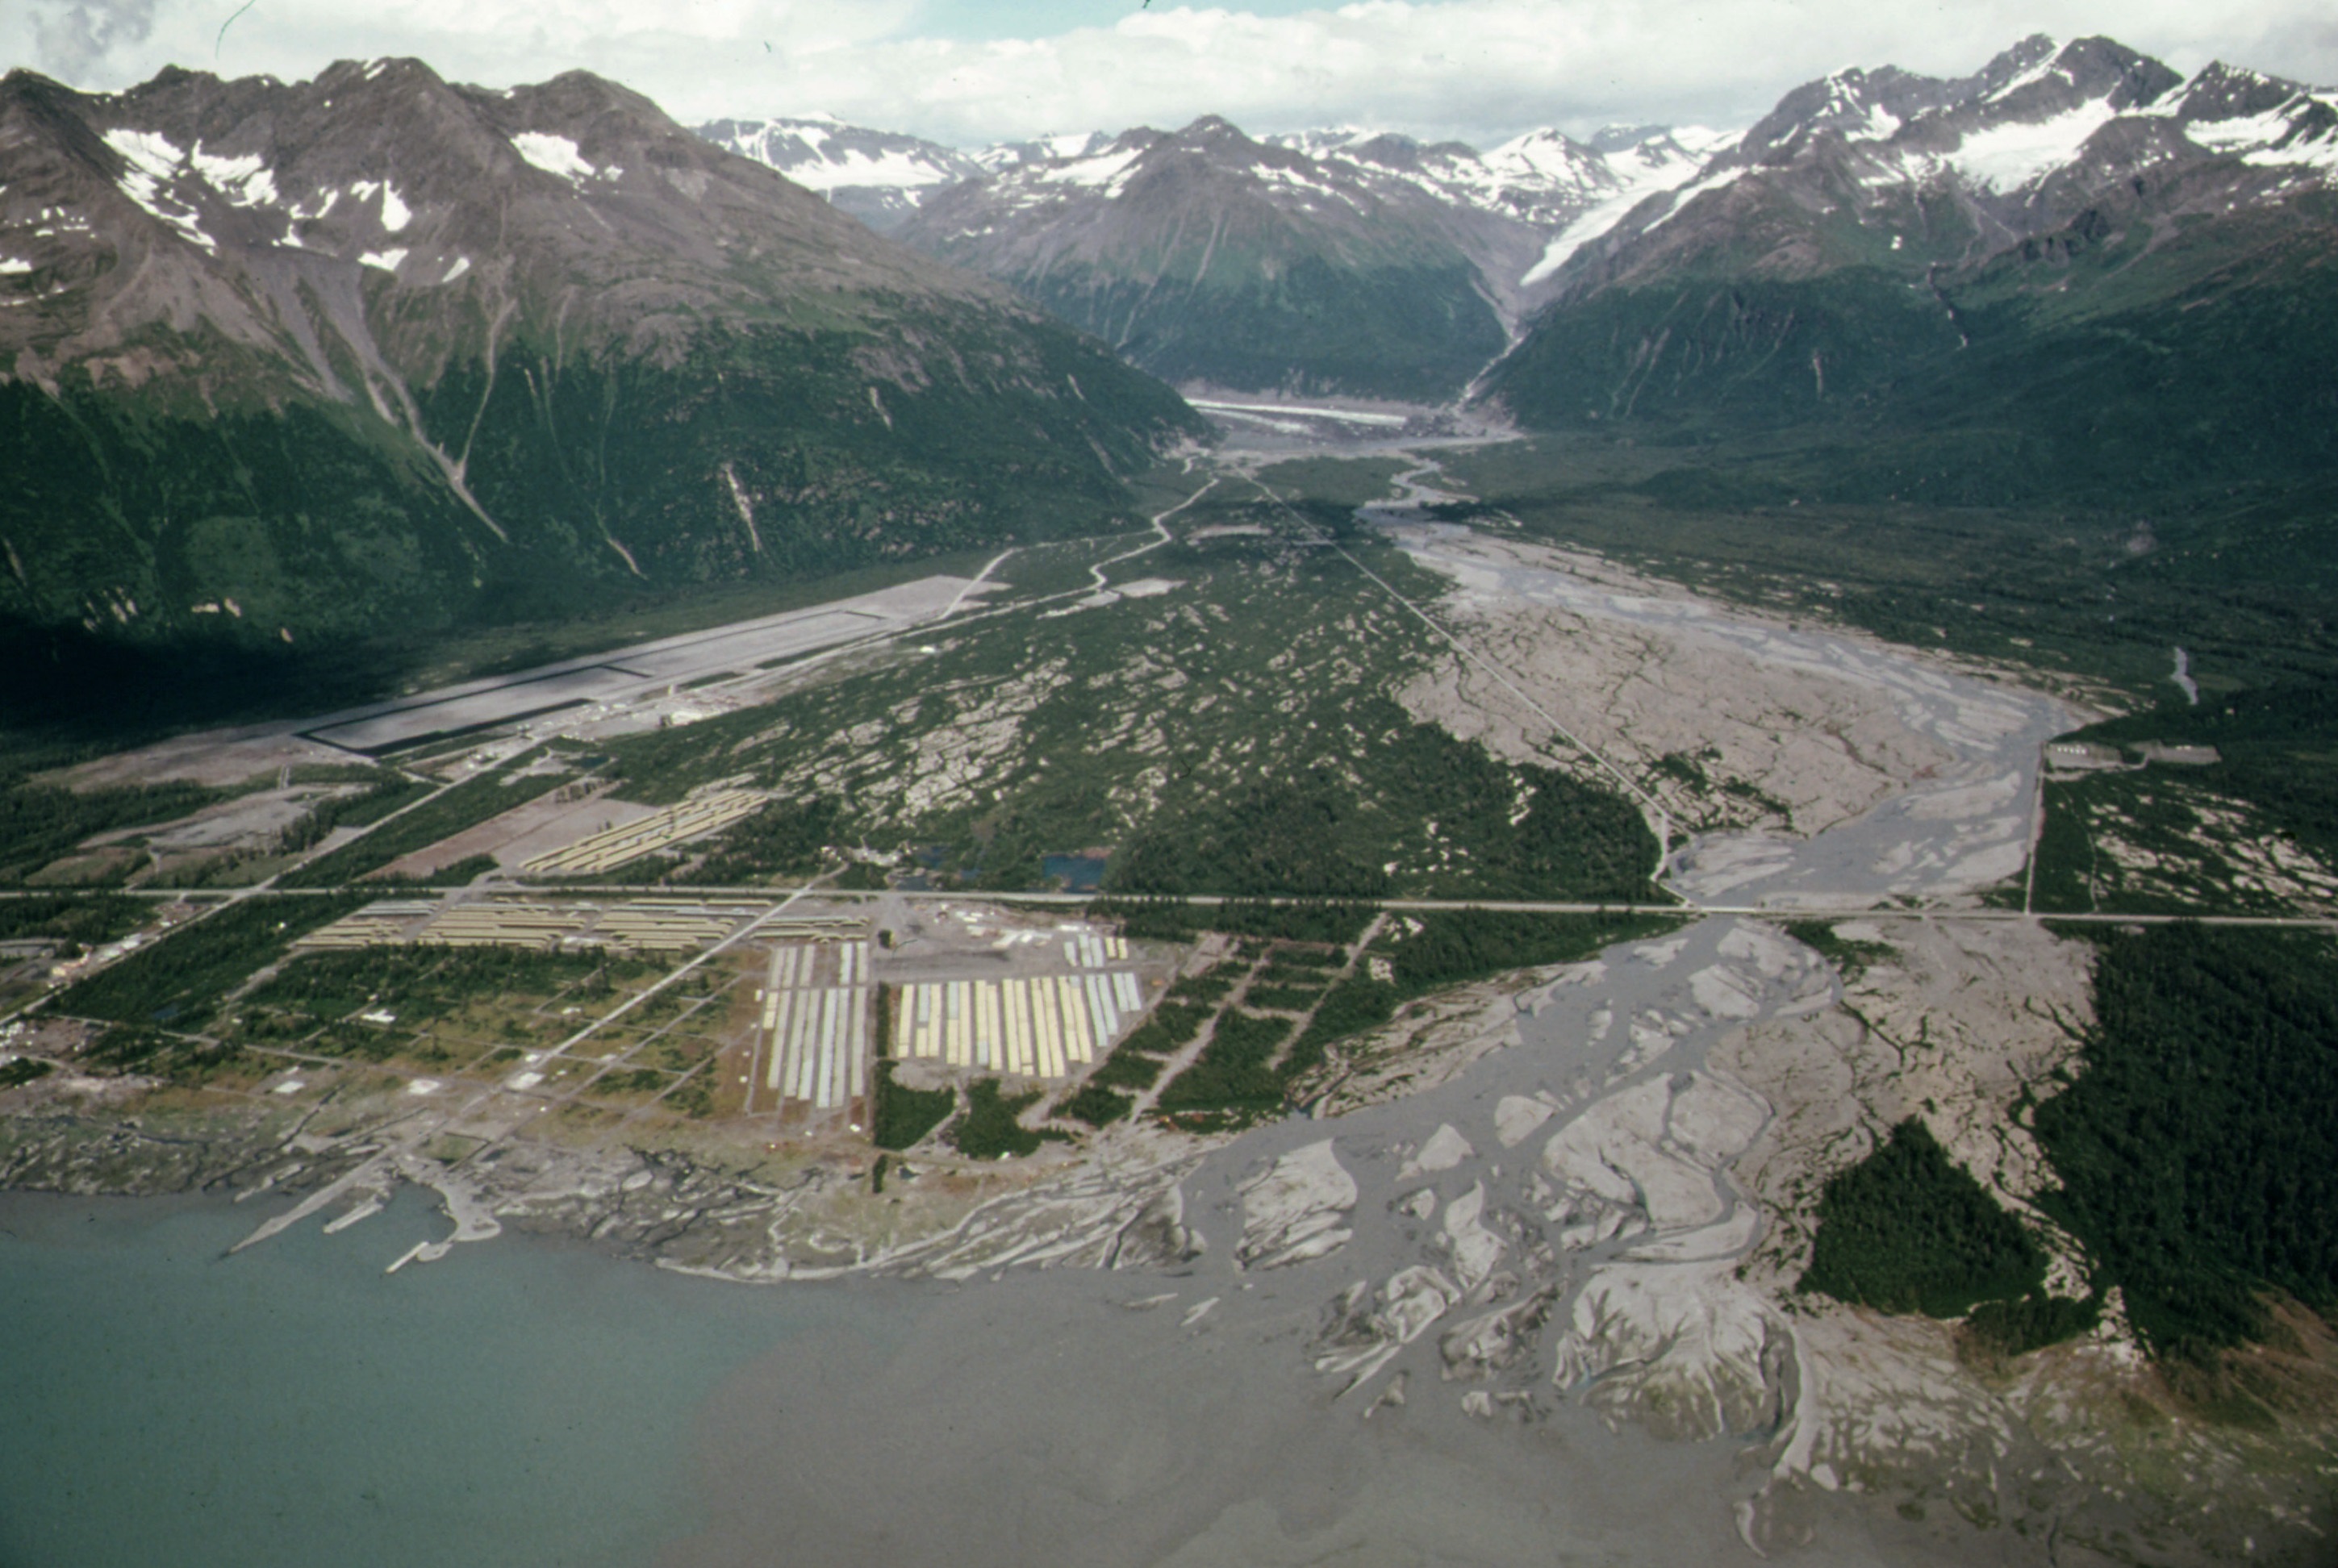 13.	An aerial view of the old township of Valdez. The community was moved to a new location after the devastating earthquake and tsunami. (Wikipedia)